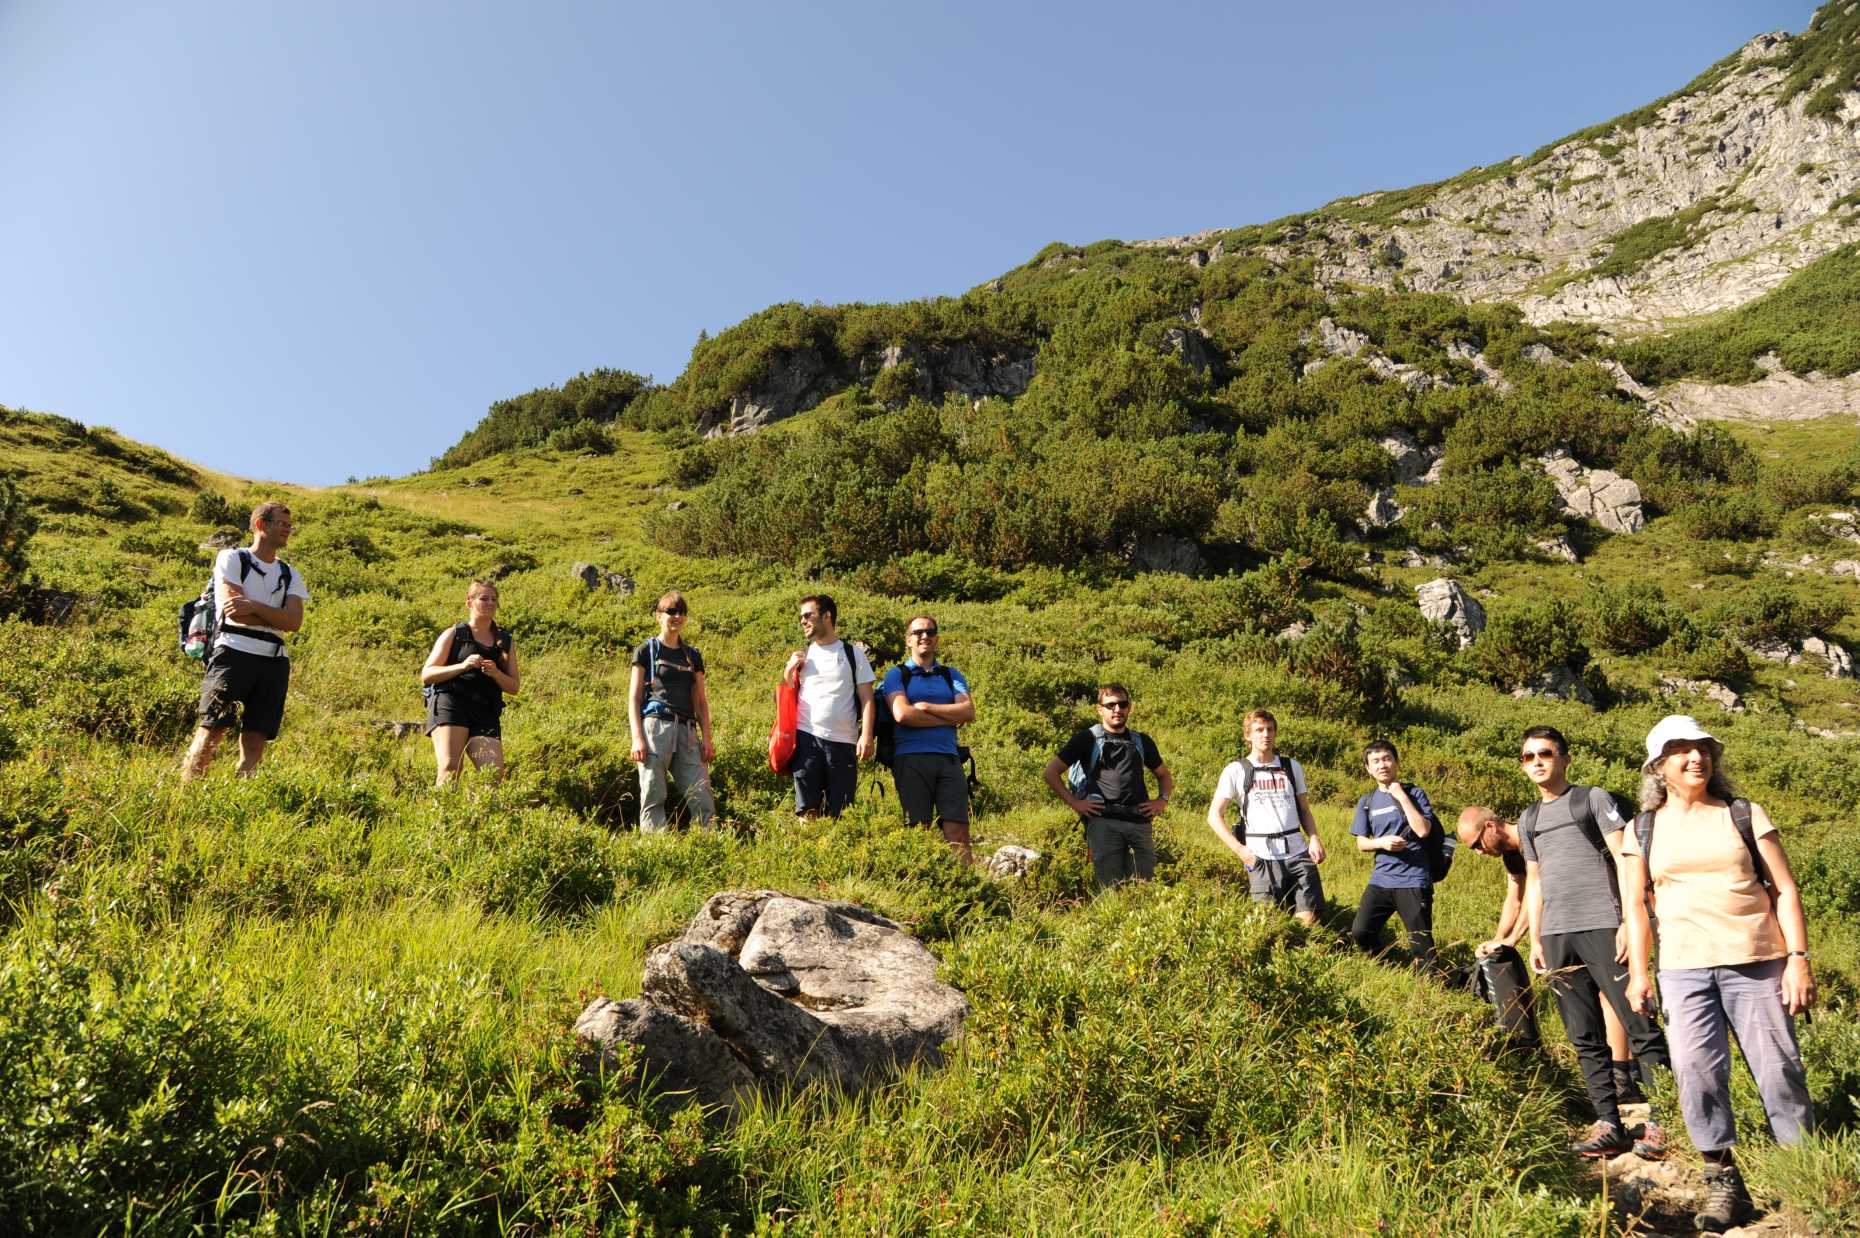 Enlarged view: Joint group hiking with Strasser Group TU Wien @ Vandas 2019